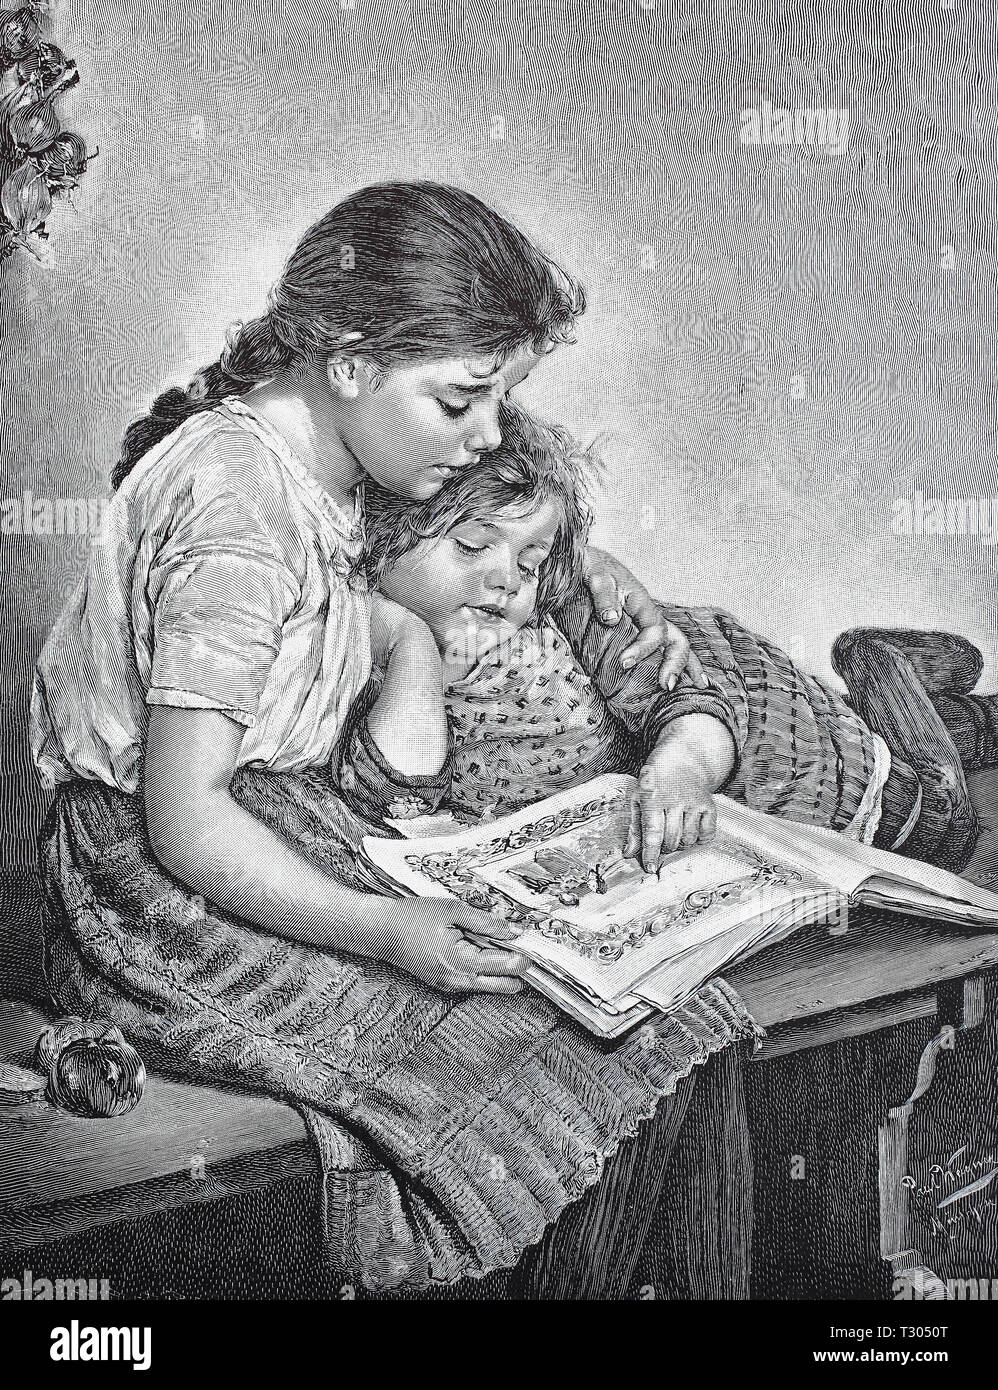 Digital improved reproduction, Two girls are deepened in a picture book, after a painting by Paul Wagner, Zwei Mädchen sind in einem Bilderbuch vertieft, nach einem Gemälde von Paul Wagner, from an original print from the 19th century Stock Photo